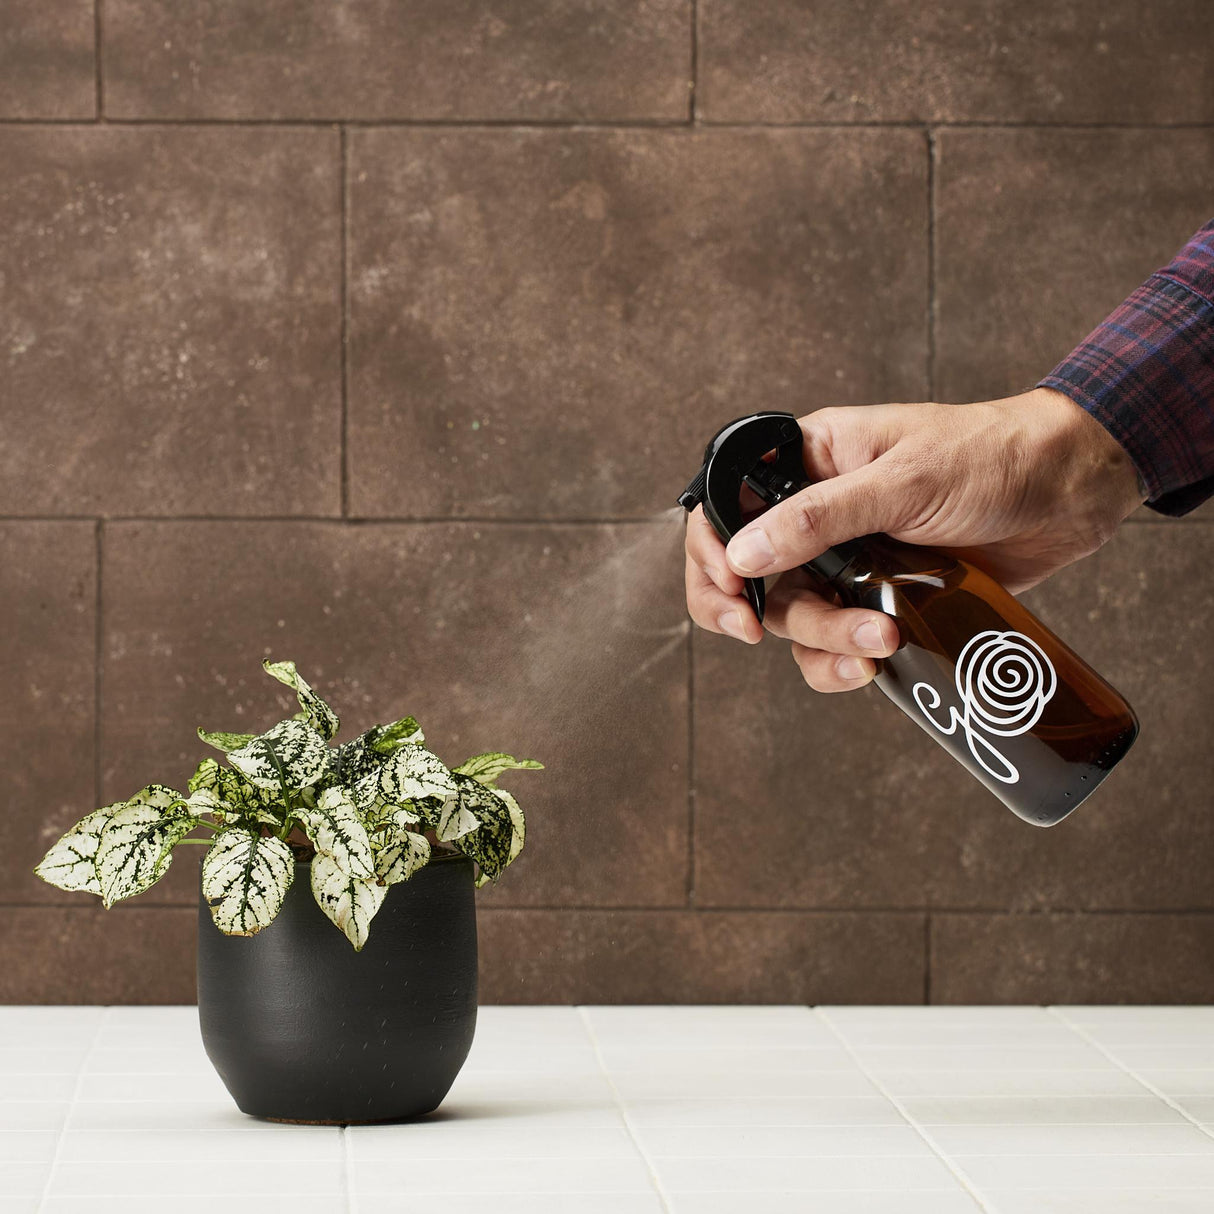 Natural houseplant cleaner - cleans and protects